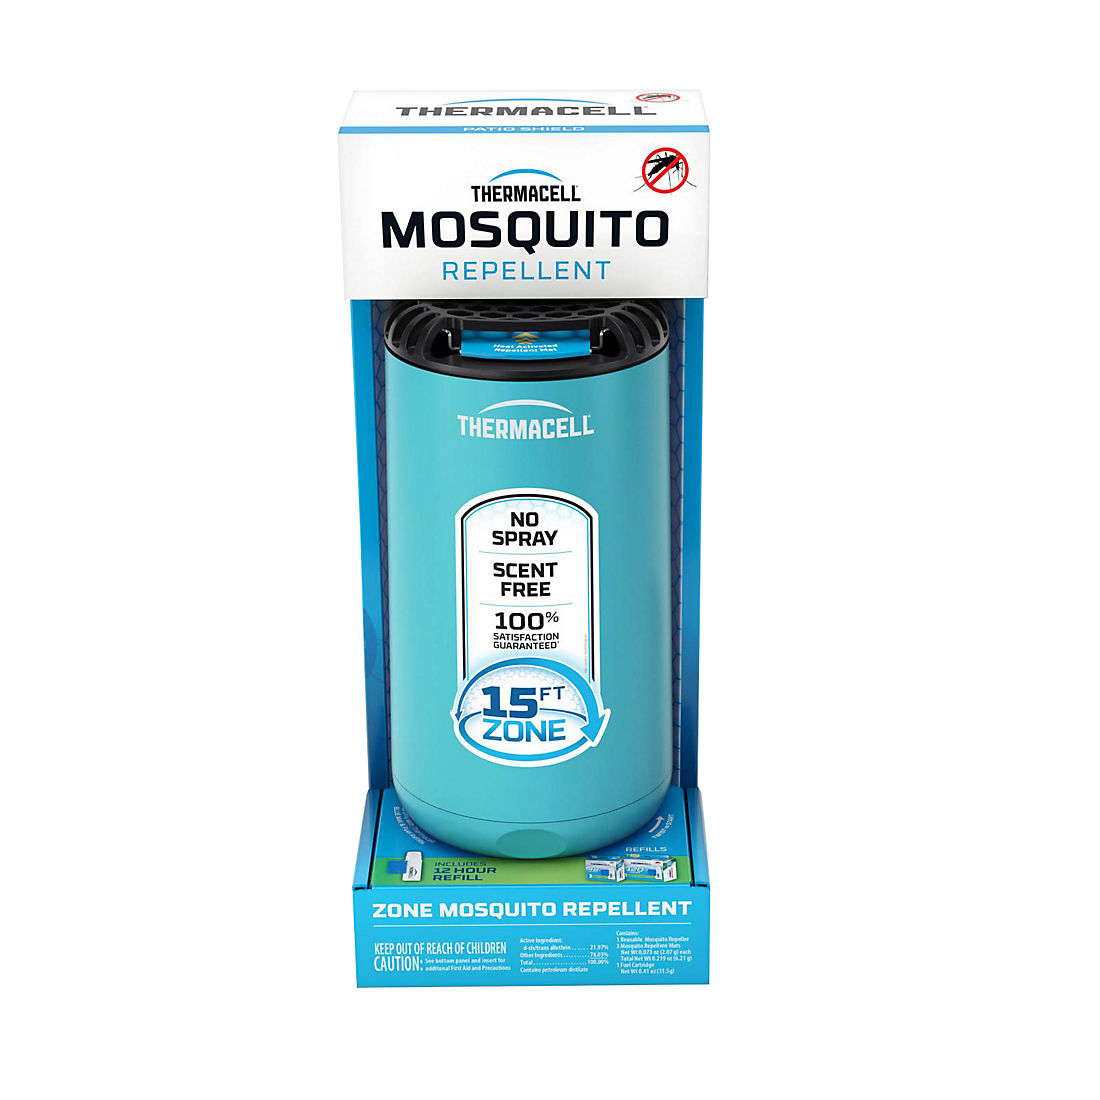 Thermacell Patio Shield Mosquito Repellent Bonus Pack